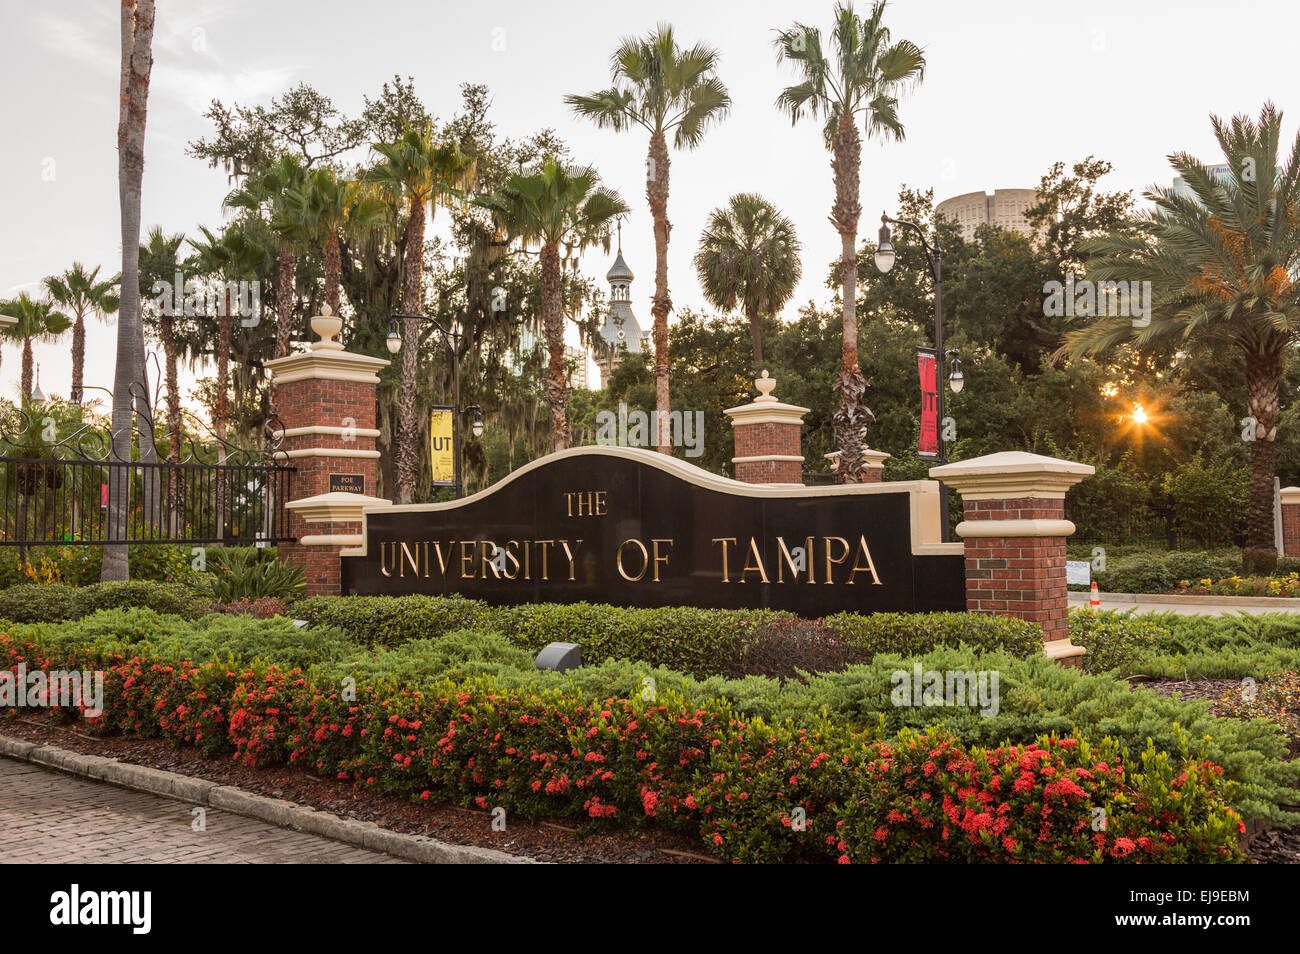 Signpost for University of Tampa Stock Photo